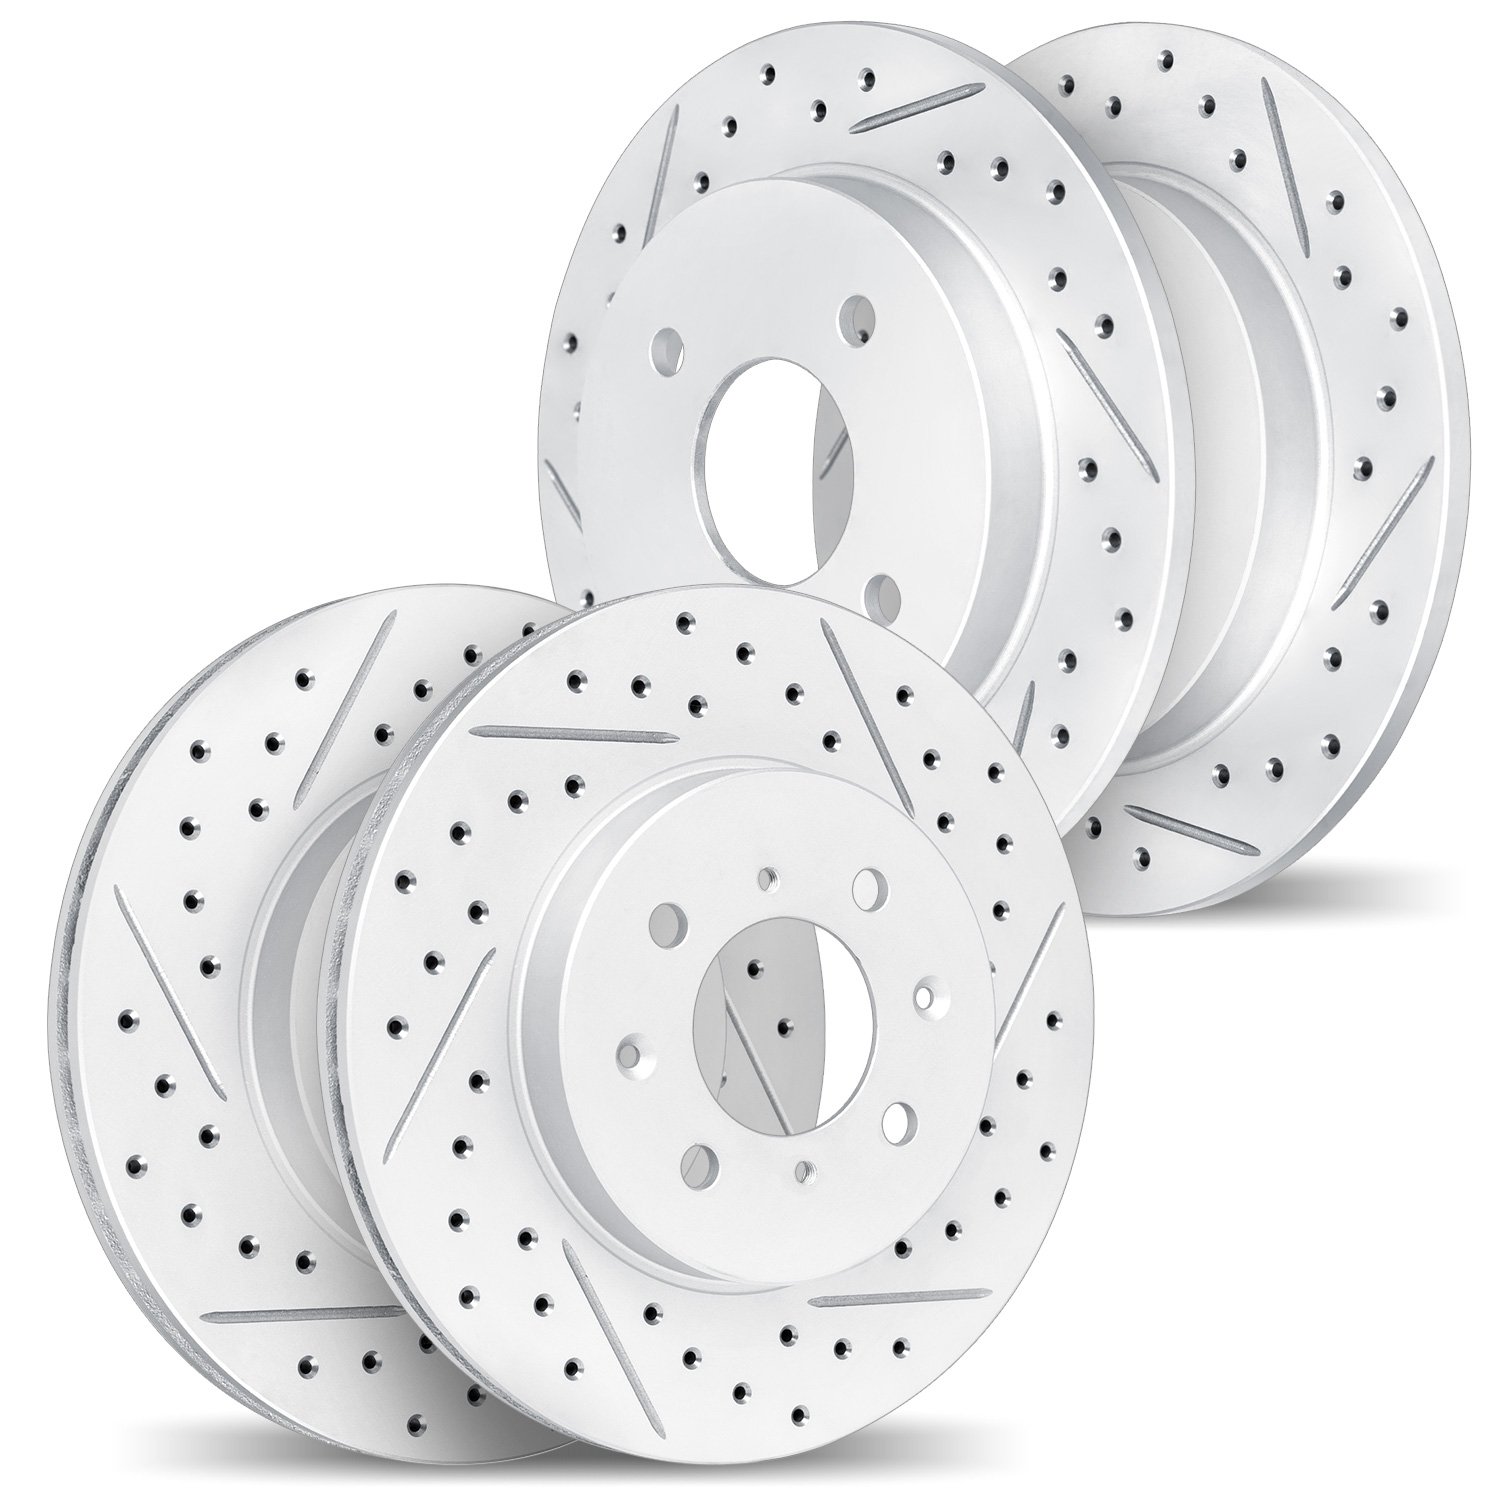 2004-80001 Geoperformance Drilled/Slotted Brake Rotors, Fits Select Multiple Makes/Models, Position: Front and Rear